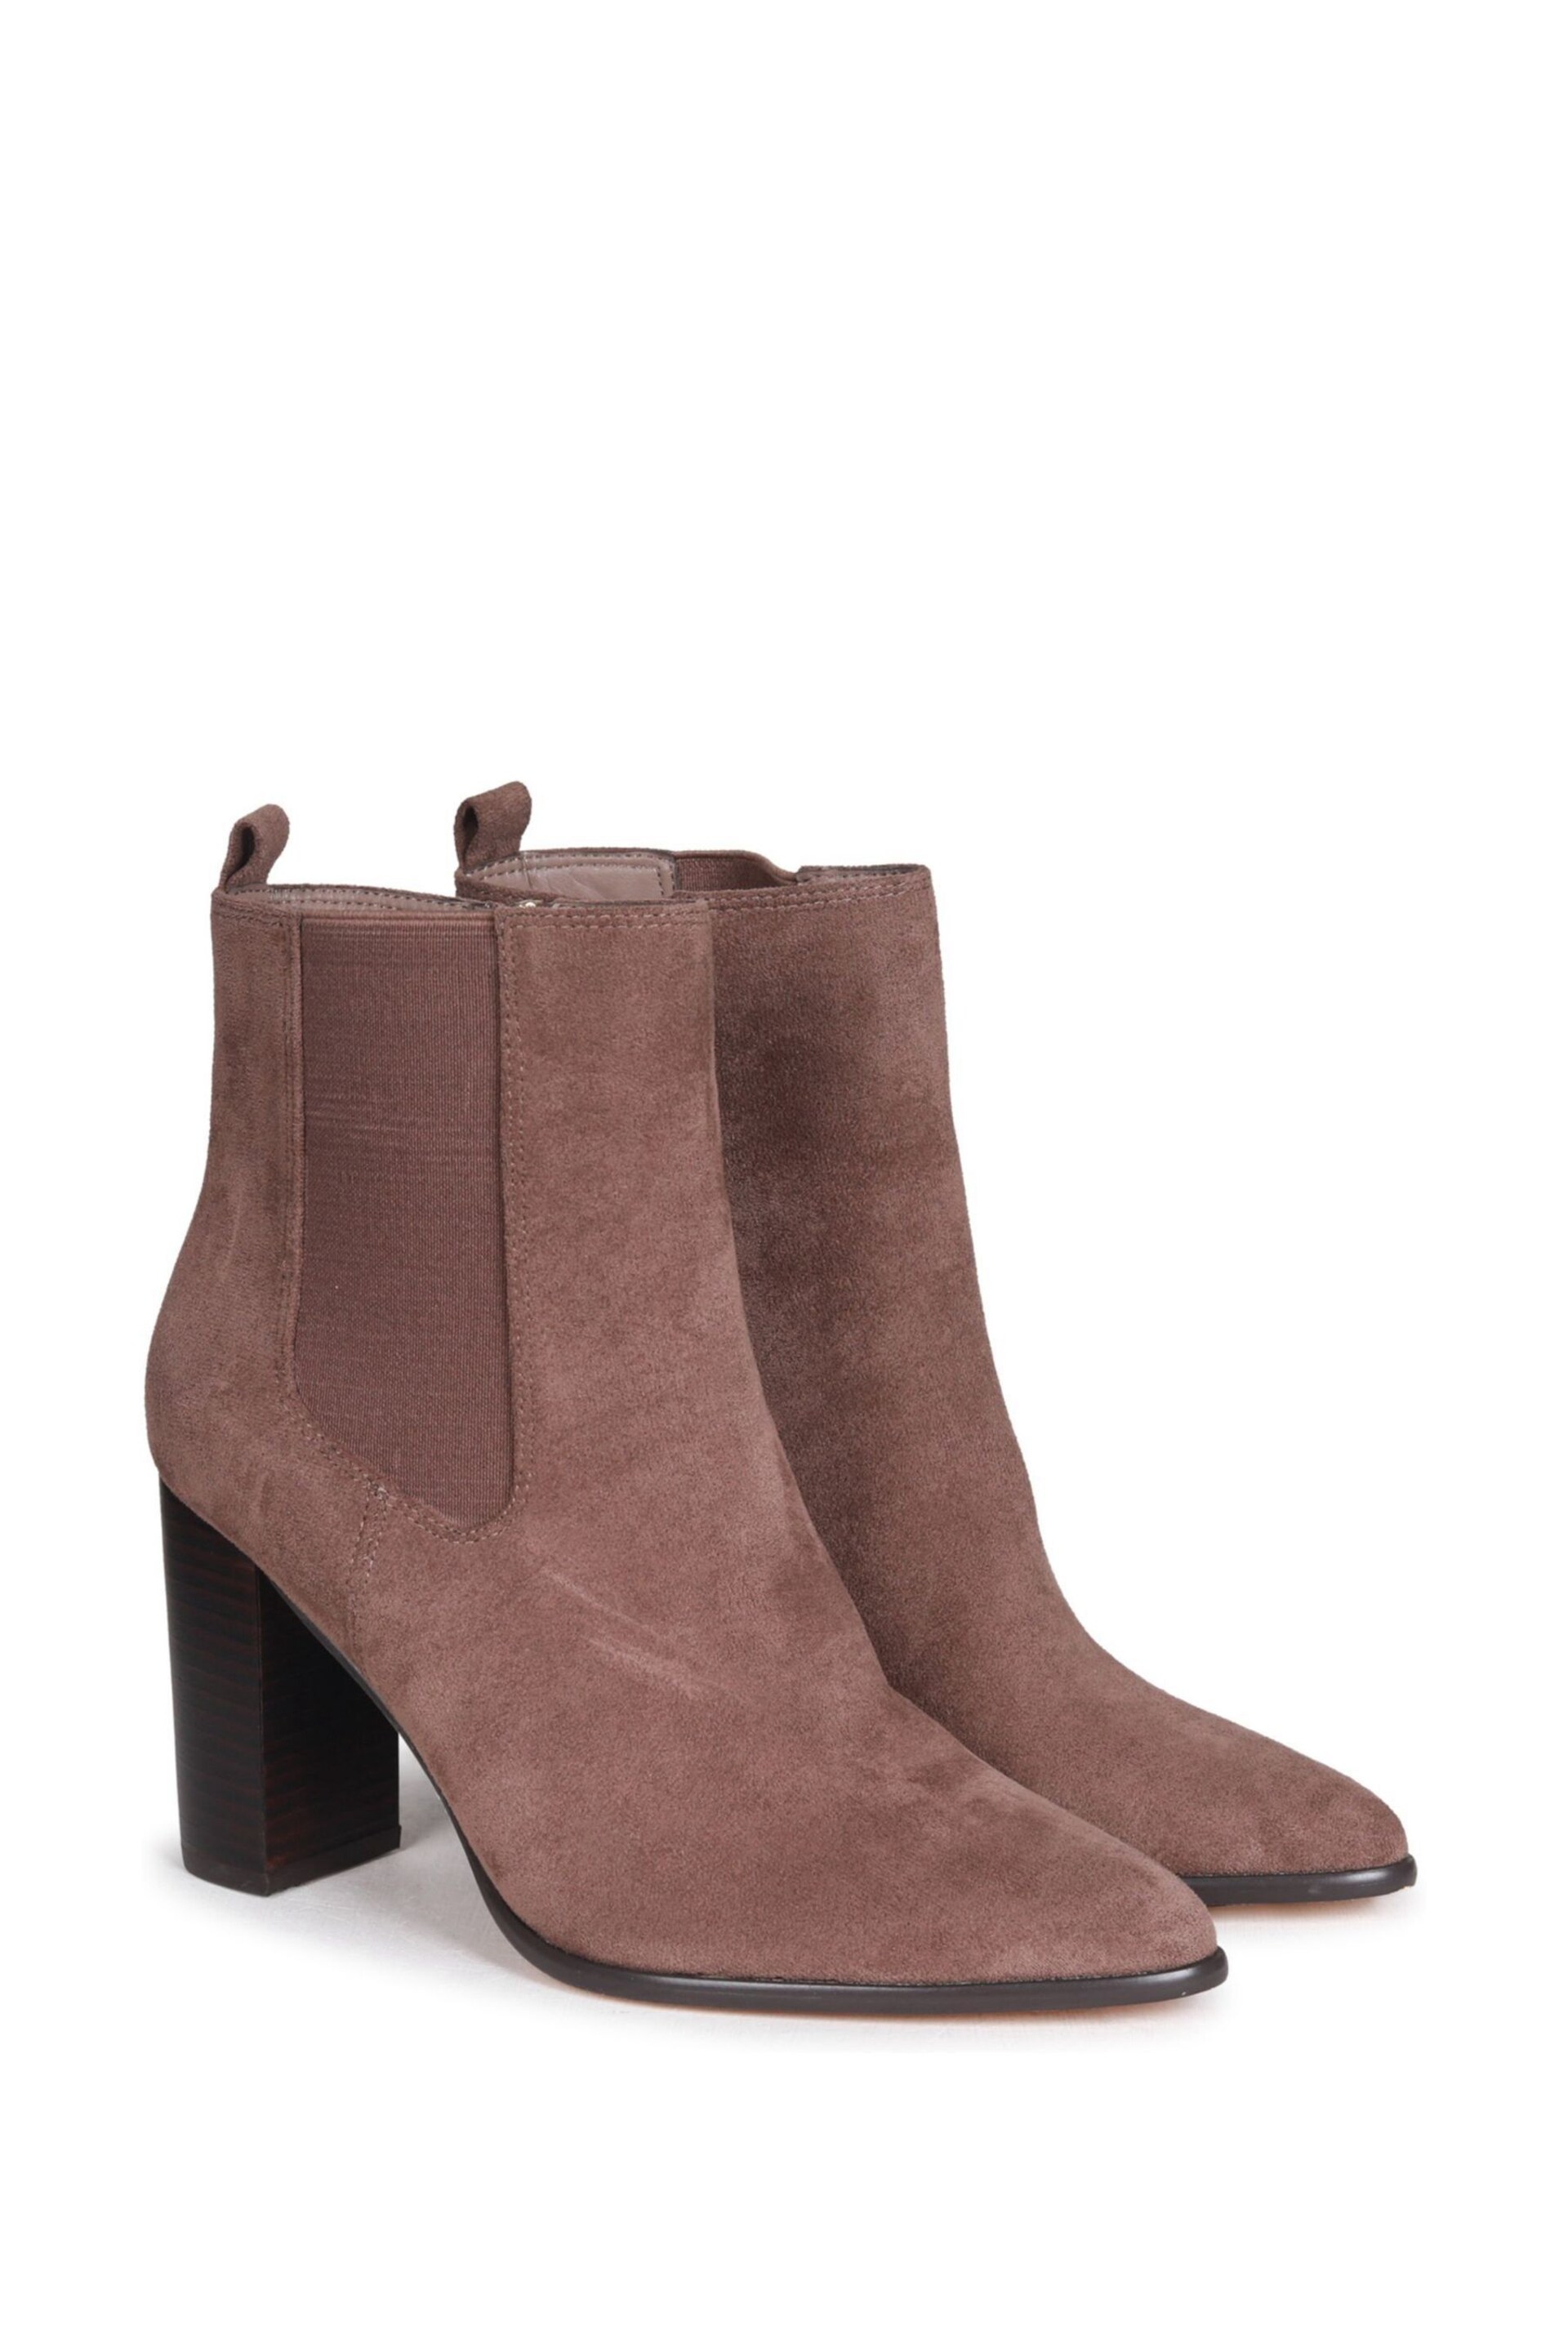 Linzi Brown Galore Block Heeled Pointed Toe Ankle Boots - Image 3 of 4